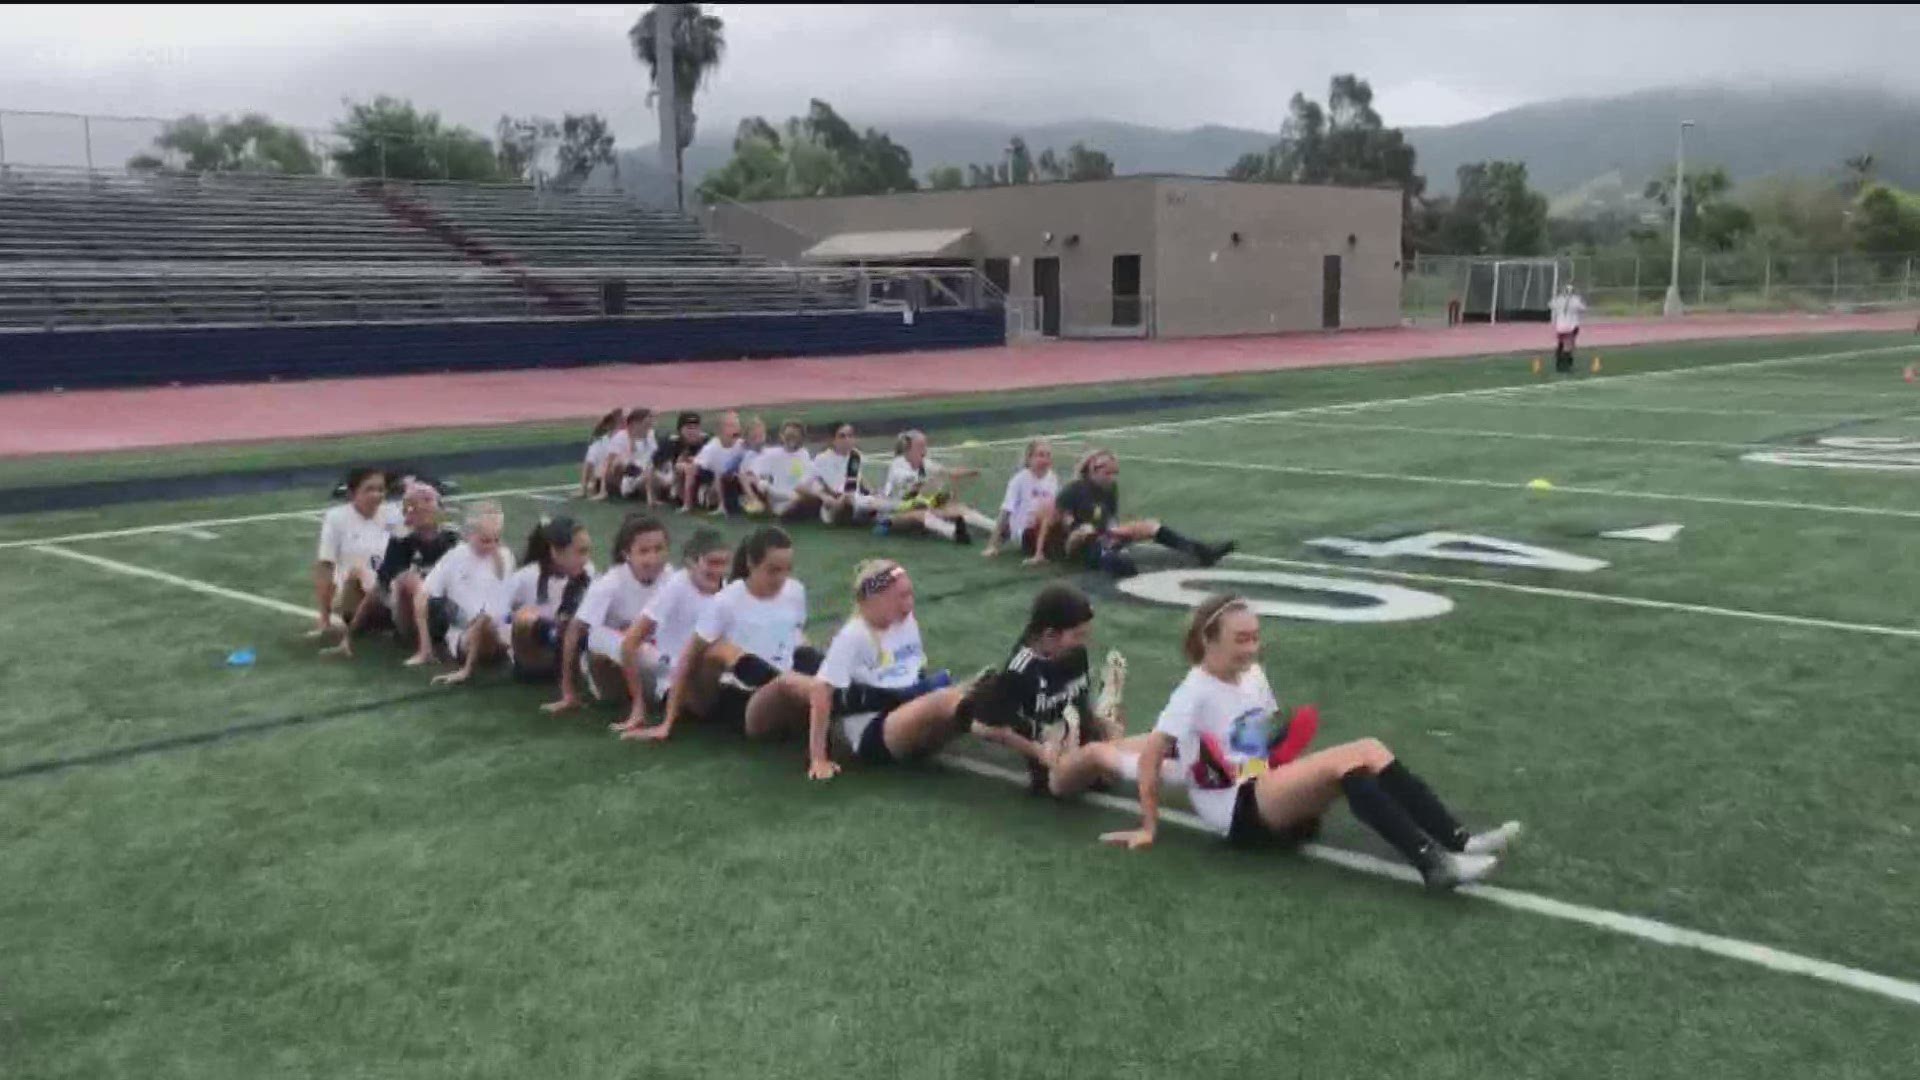 Professional soccer player Lauren Sesselmann and San Marcos High School coach Daniel McKell talked about the camp and what they hope girls take away from it.